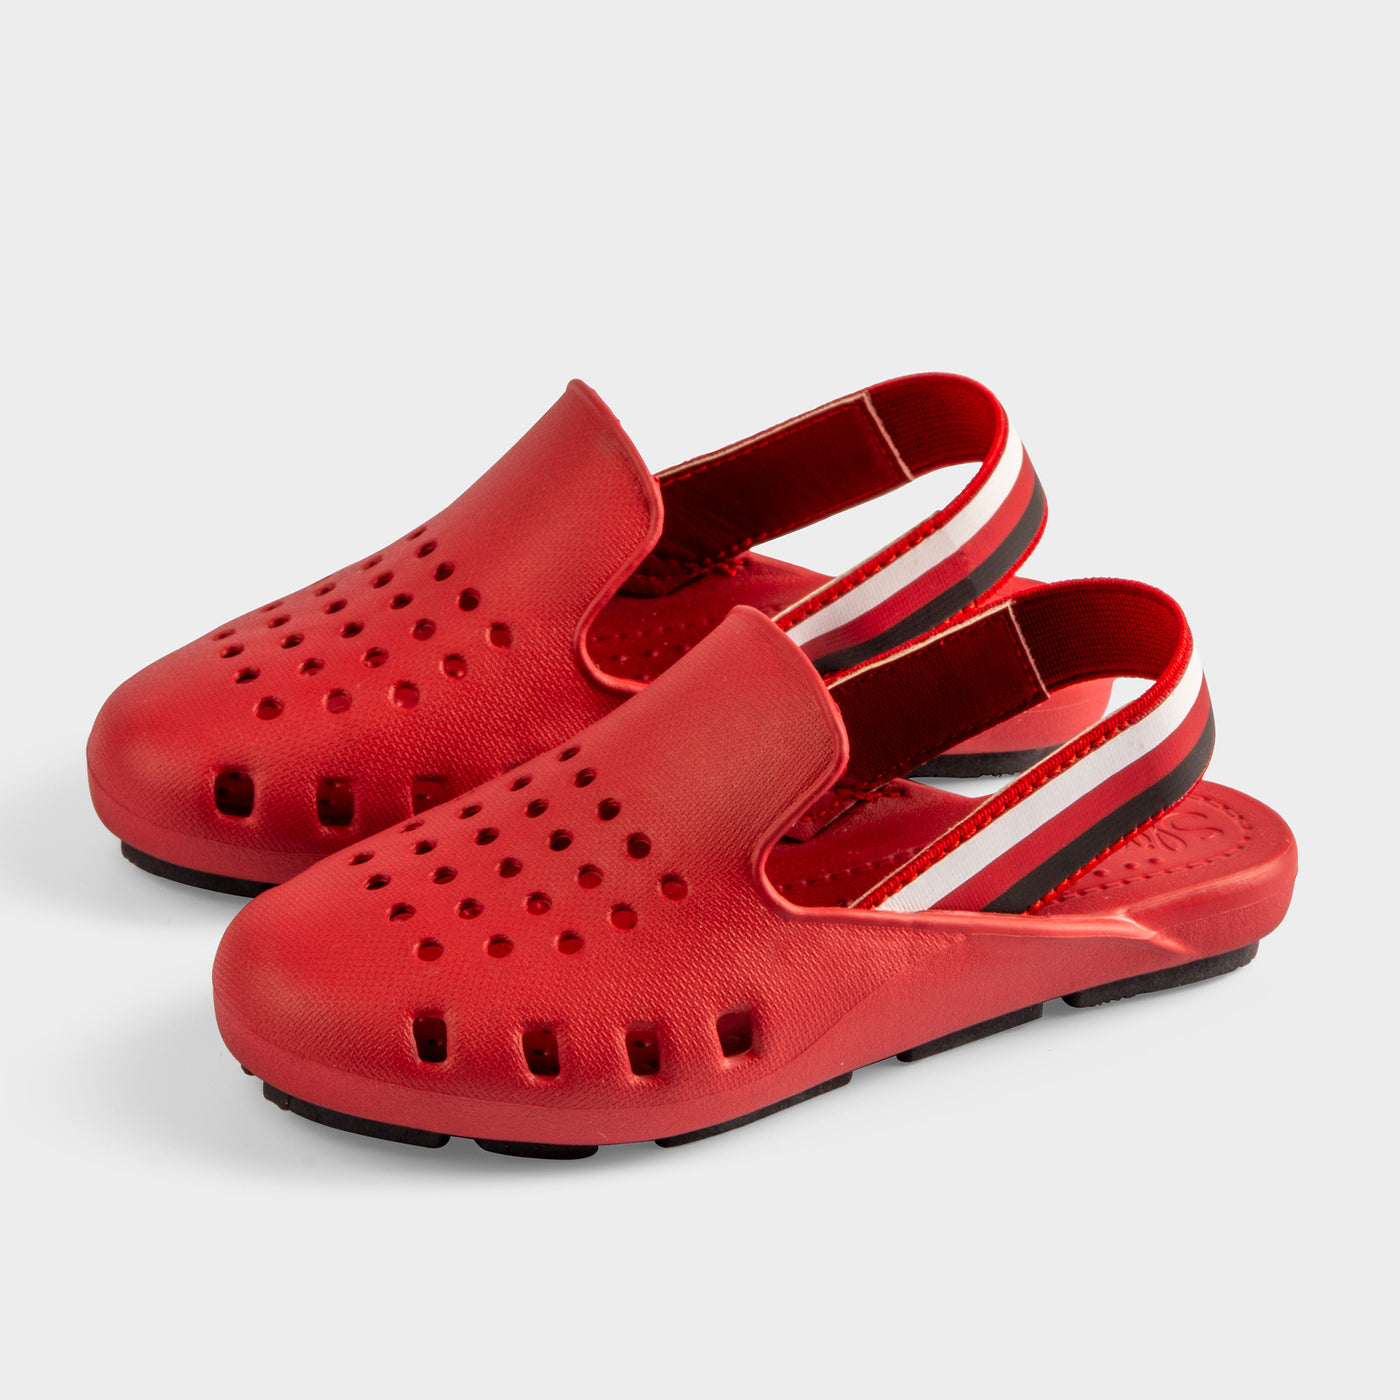 Crocs style red shoe with elastic strap. girls pool sandal